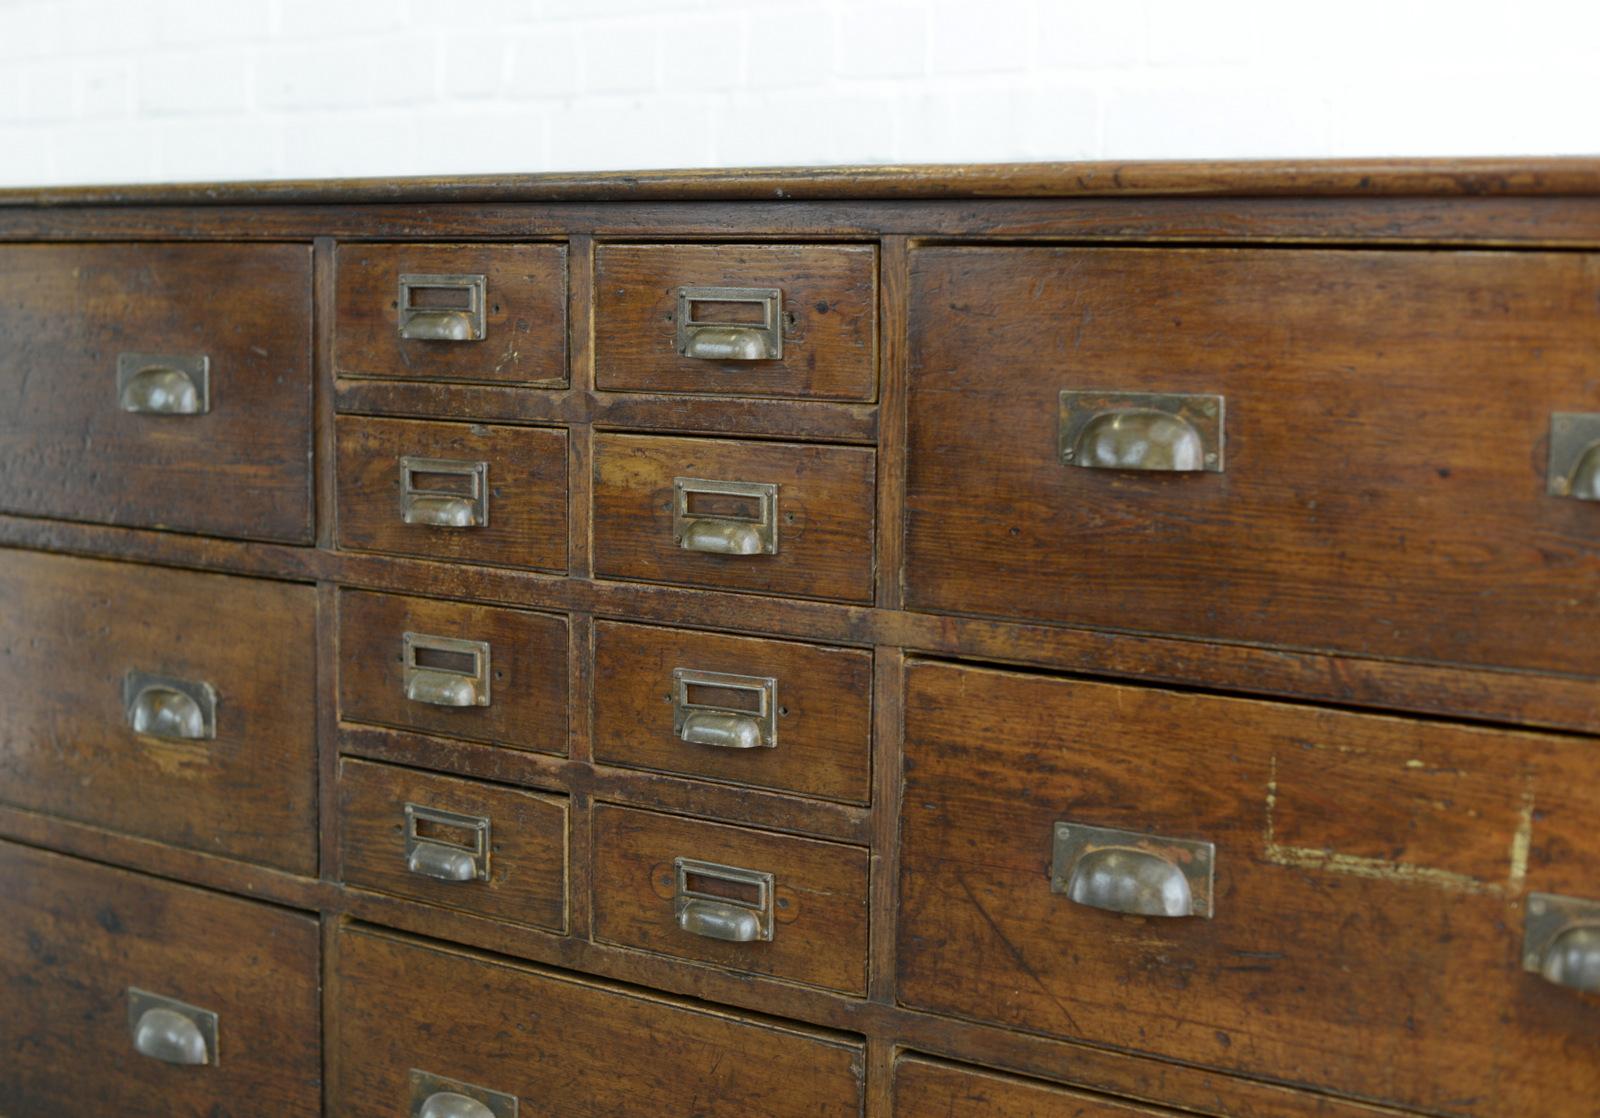 Early 20th Century English Factory Drawers, circa 1900